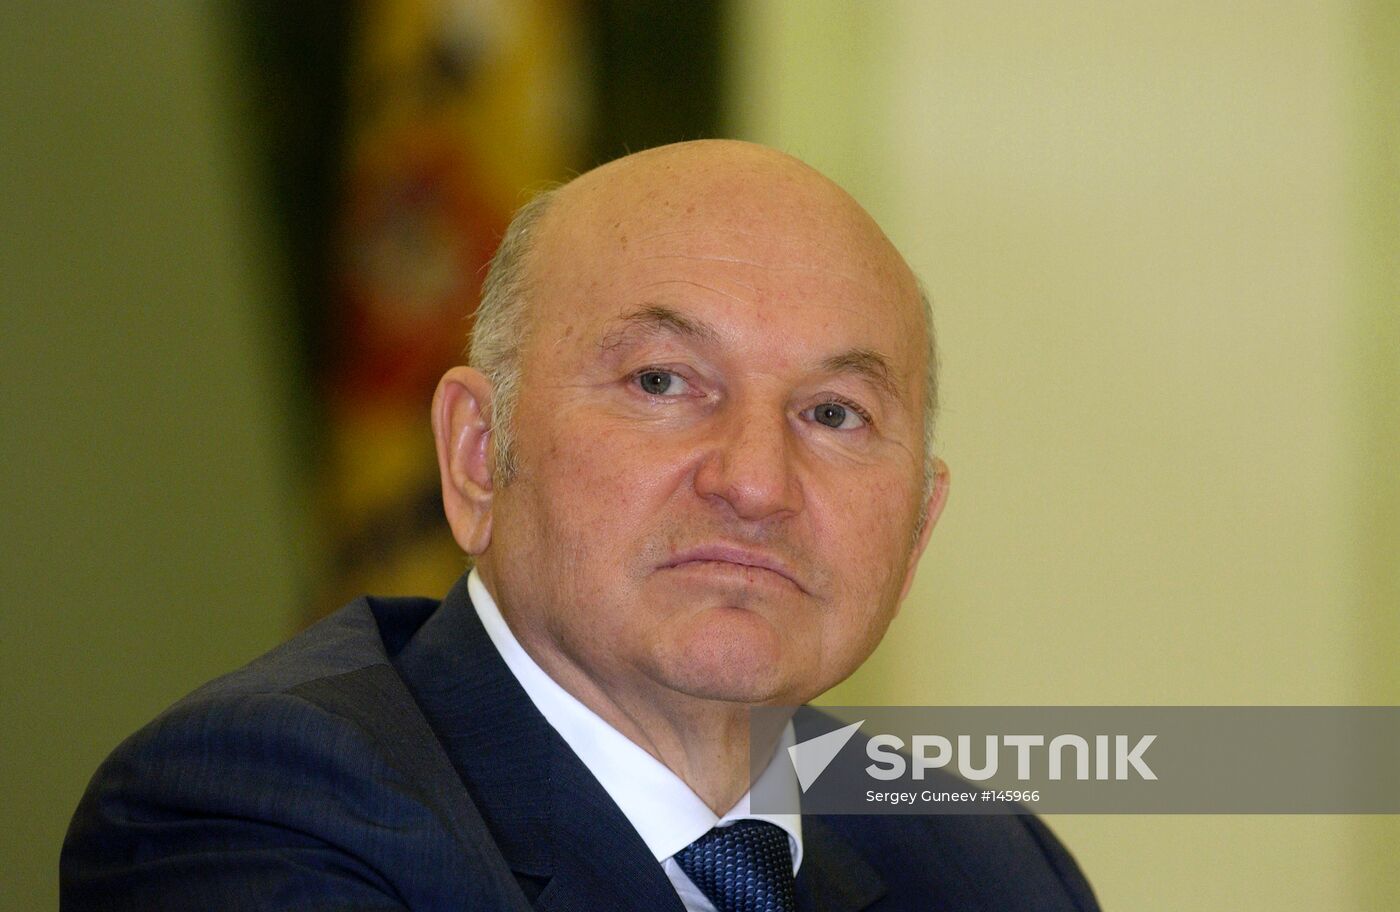 LUZHKOV "COUNCIL OF ELDERS" RUSSIA JAPAN SESSION